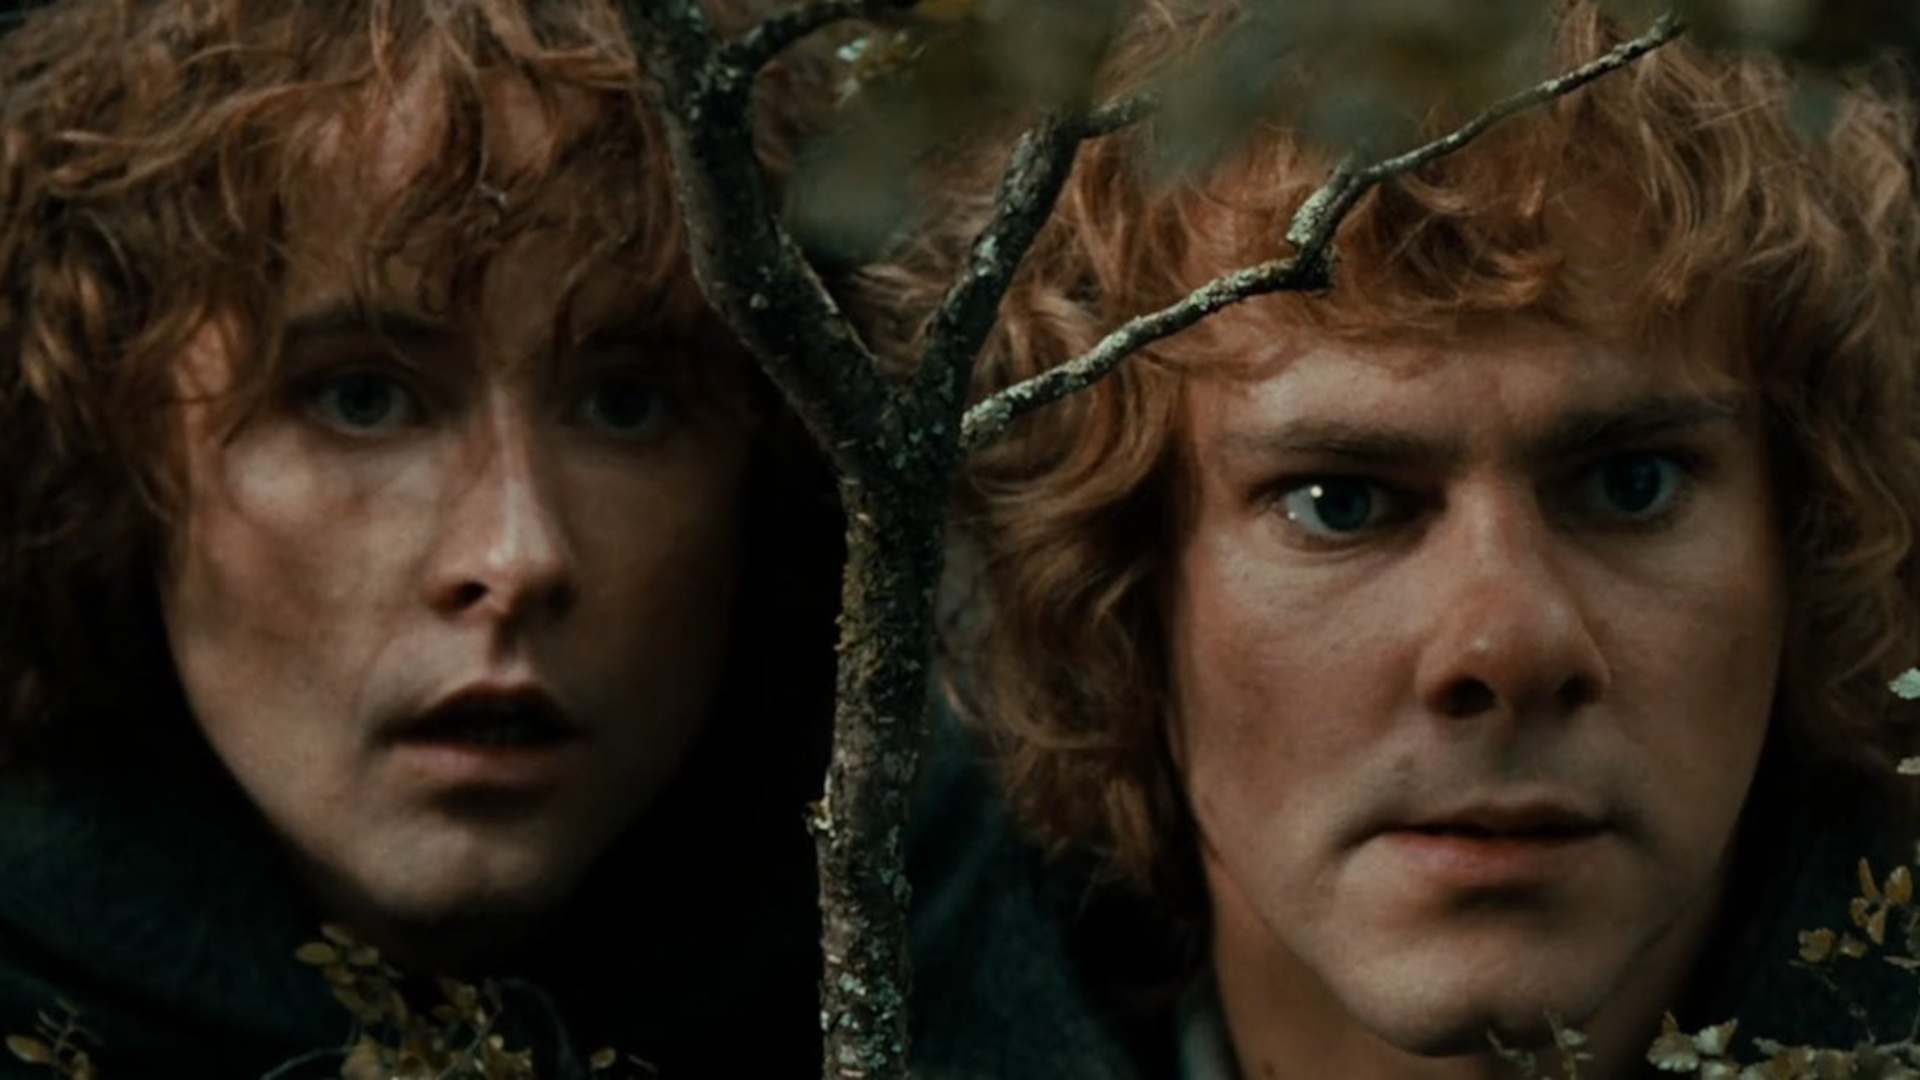 Merry and Pippin podcast, Hobbit life, 1920x1080 Full HD Desktop